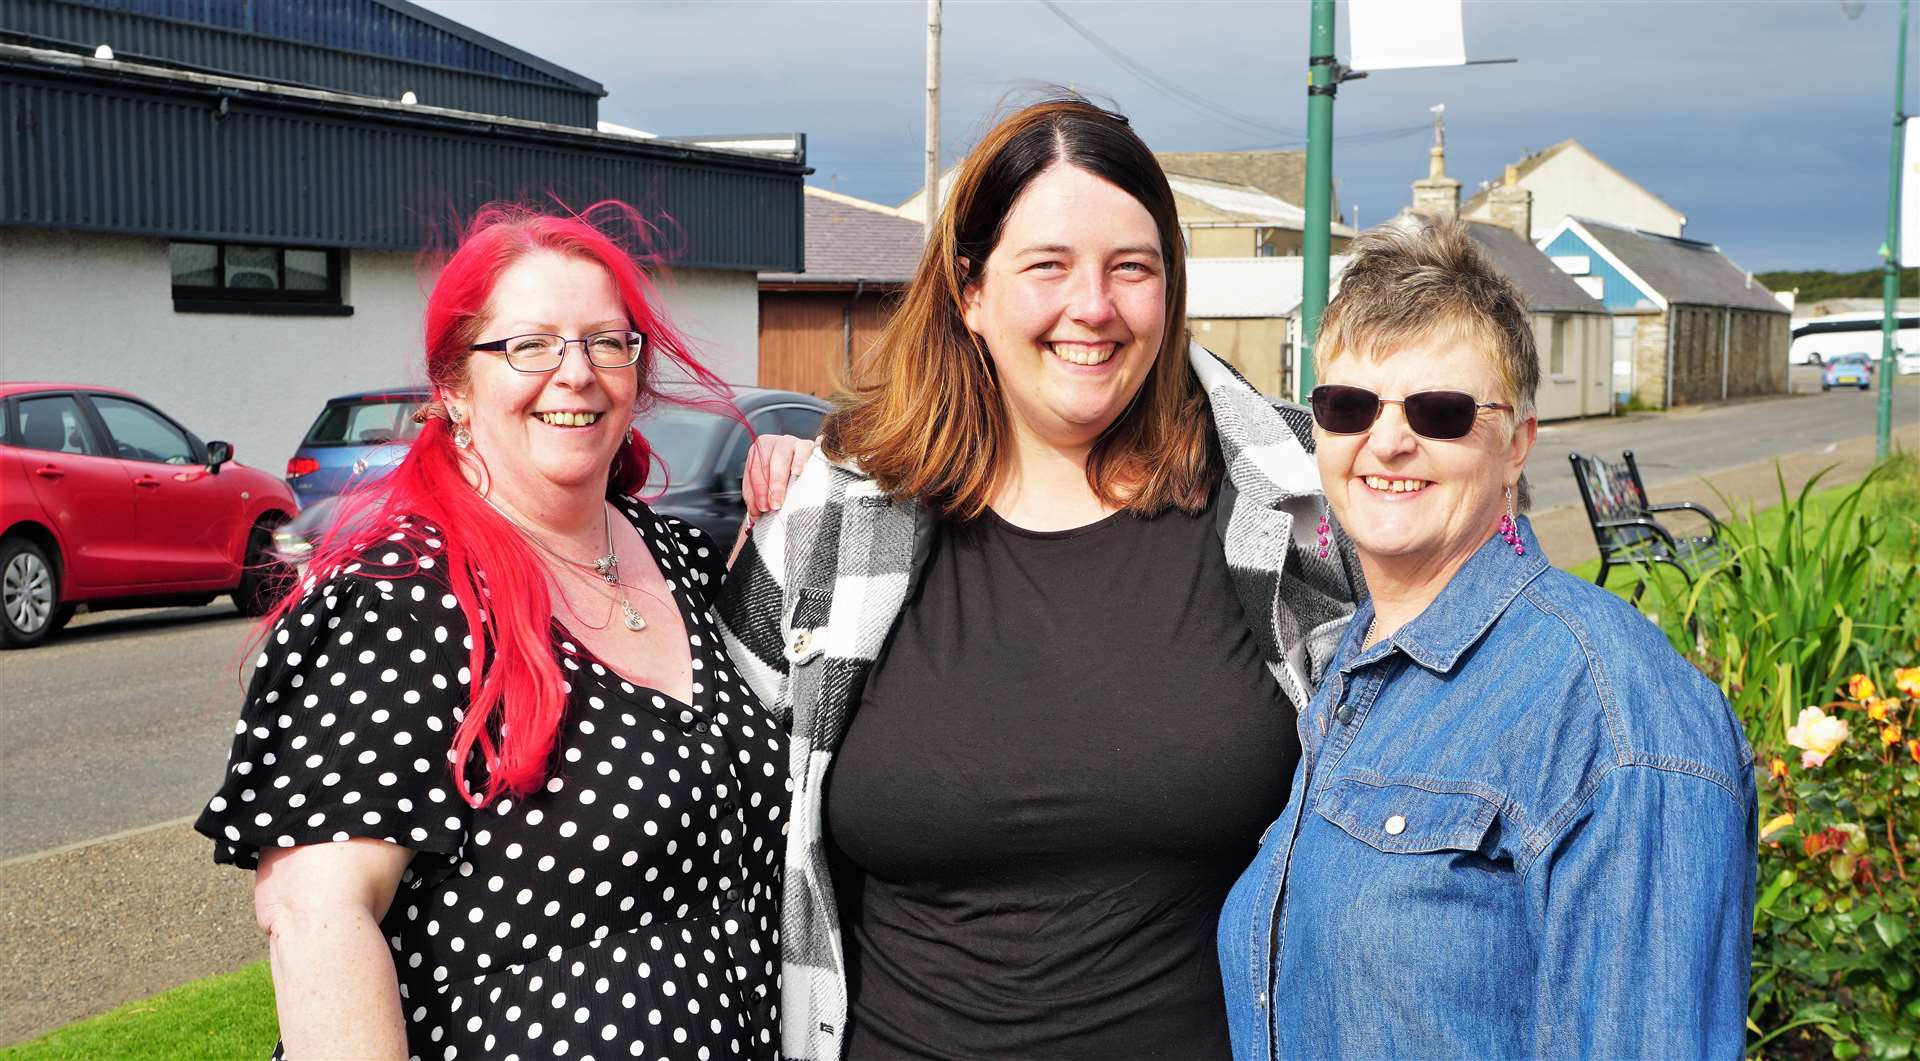 The Thurso Food and Craft Fair team members are, from left, Penny Irvine, Kara Fraser and Yvonne Rathbone. Picture: DGS